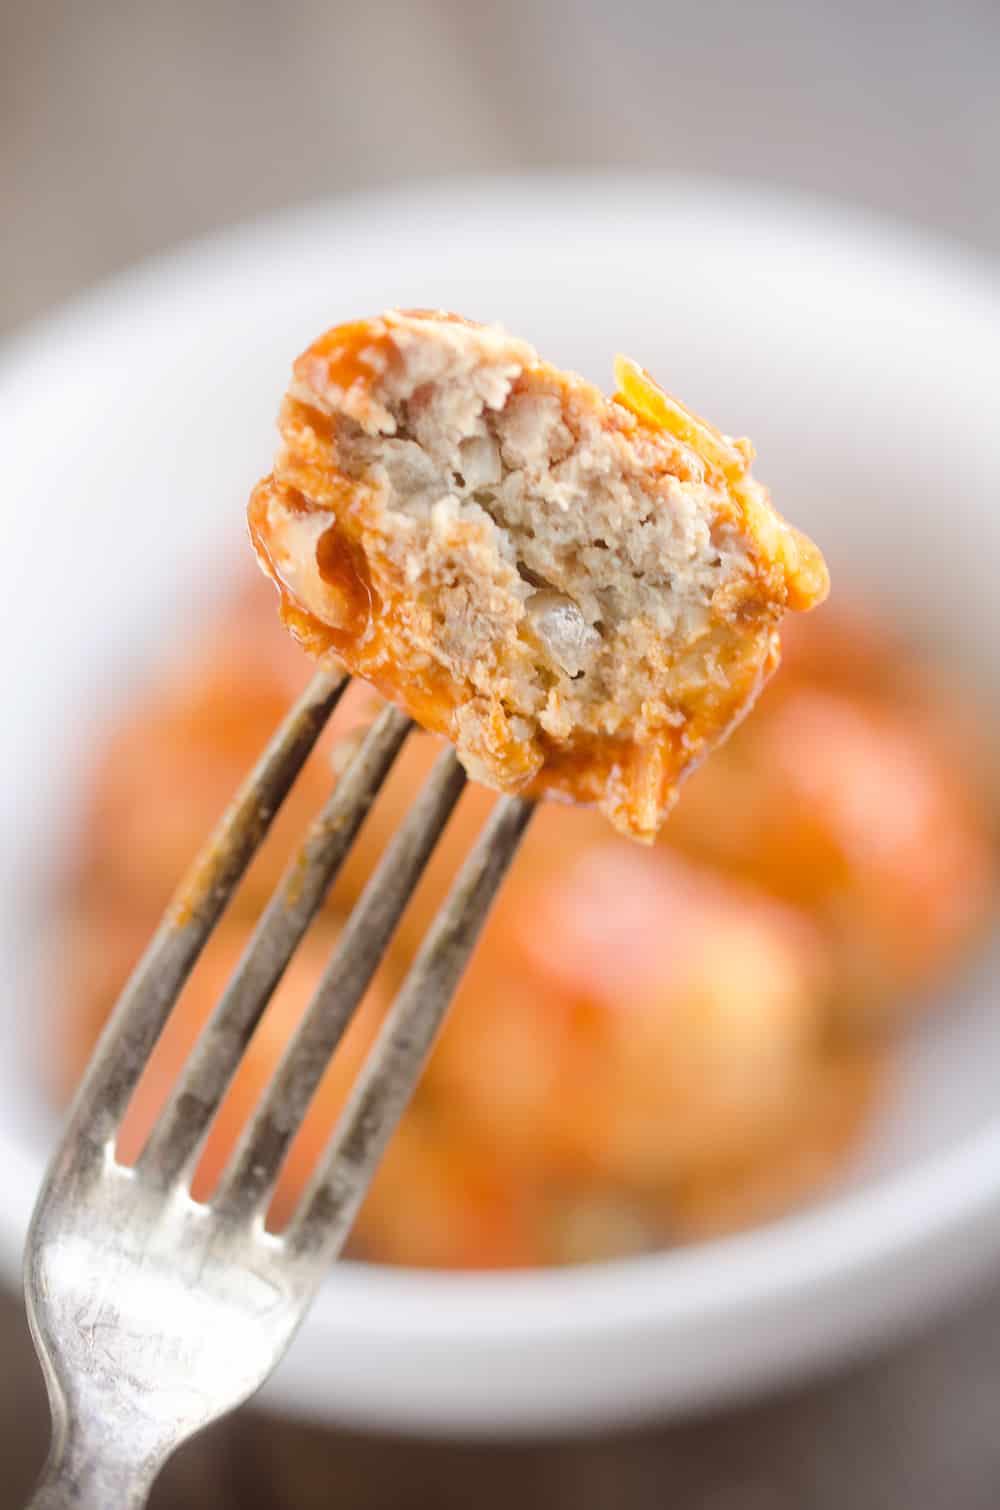 Light Crock Pot Buffalo Turkey Meatballs are an easy recipe made in your slow cooker bursting with bold flavor from spicy buffalo sauce and bleu cheese crumbles! Serve them as an appetizer on game day or pair them with a side of rice and veggies for a flavorful dinner.